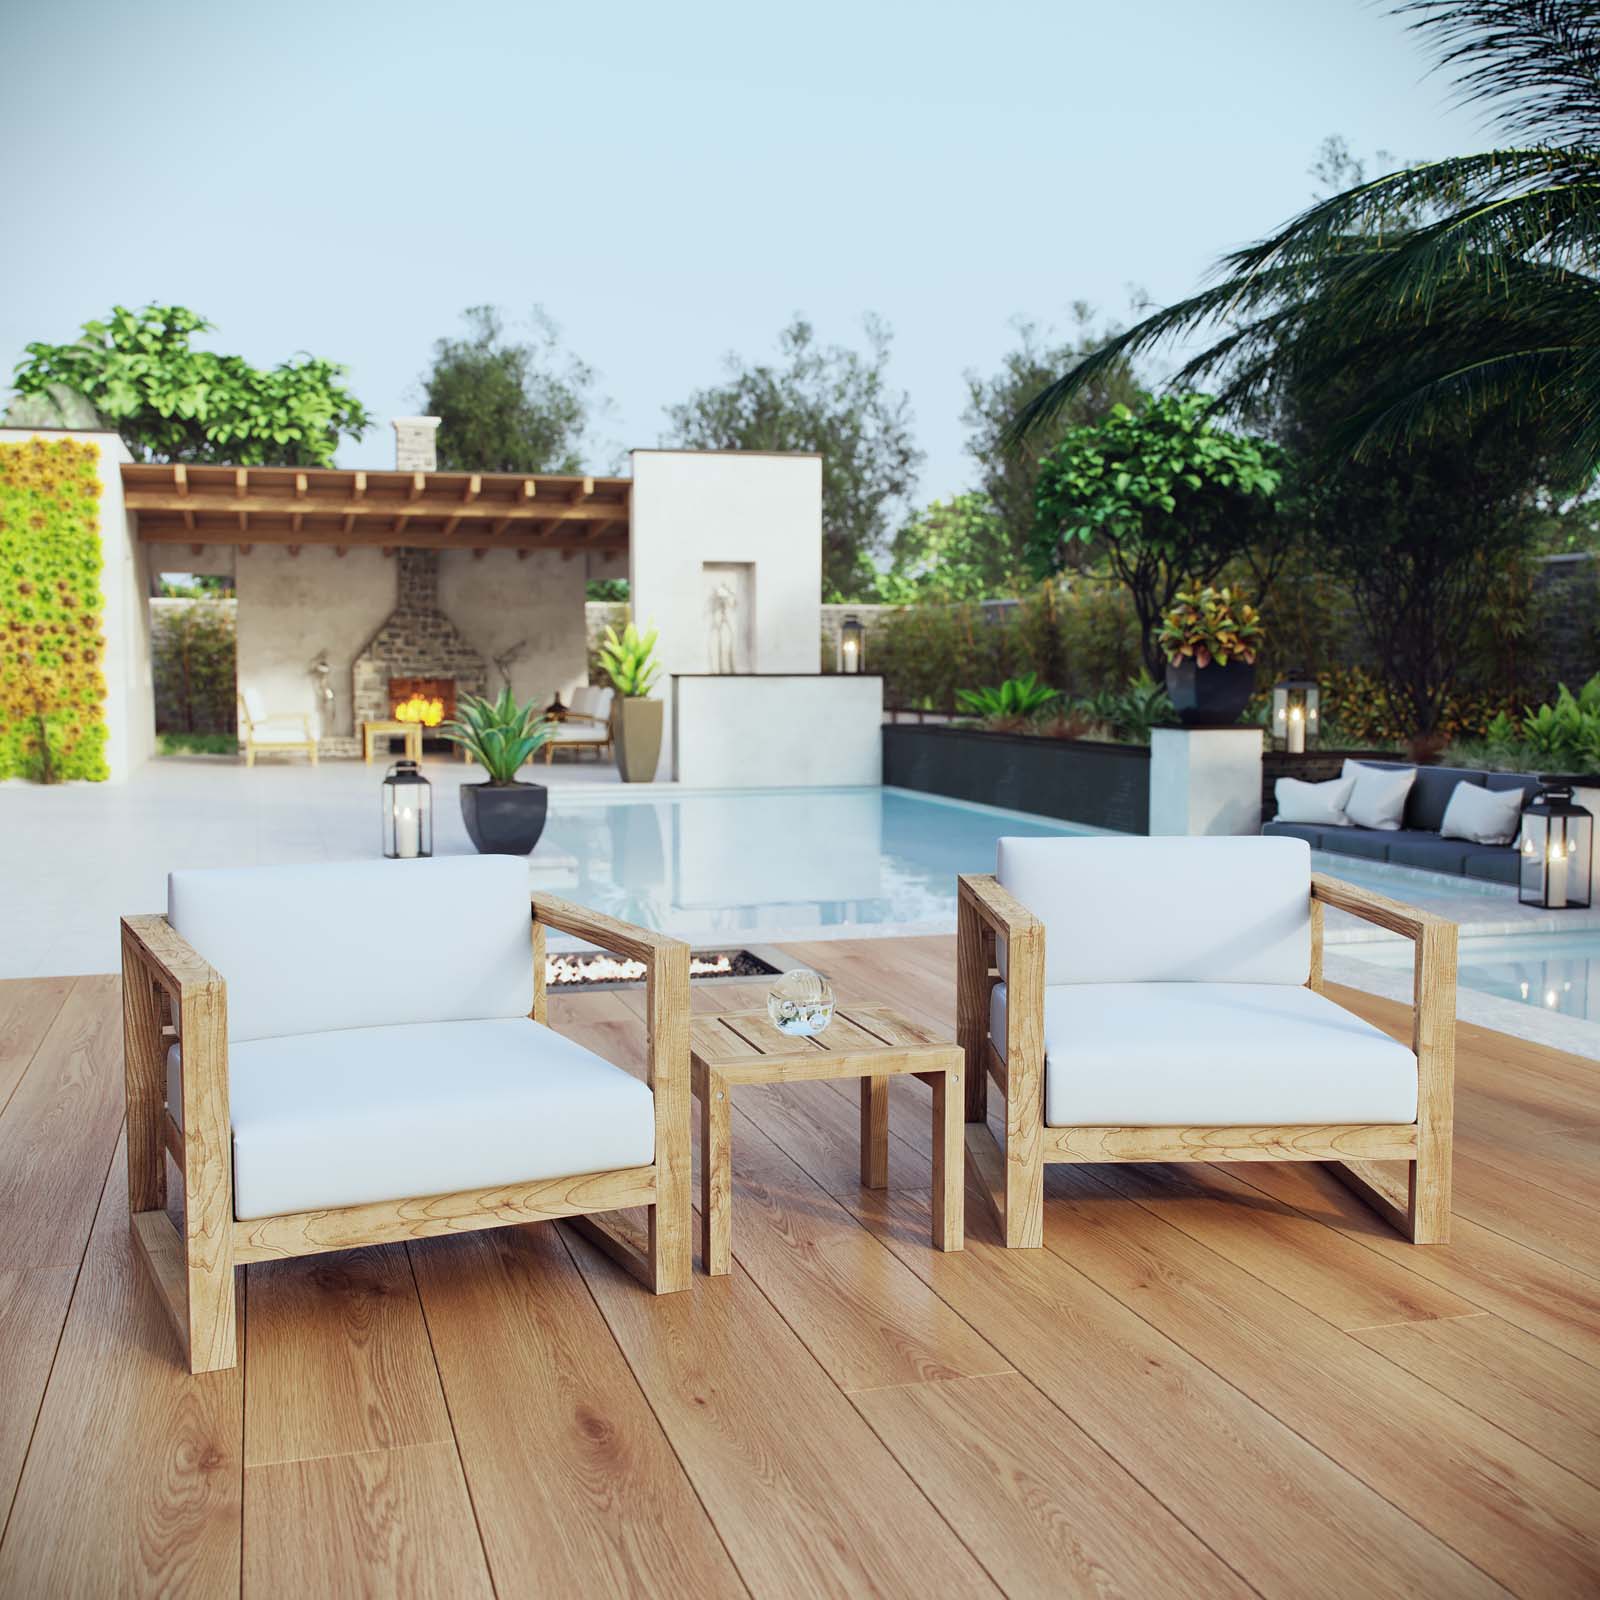 Modway Upland 3 Piece Outdoor Patio Teak Set in Natural White - image 1 of 7